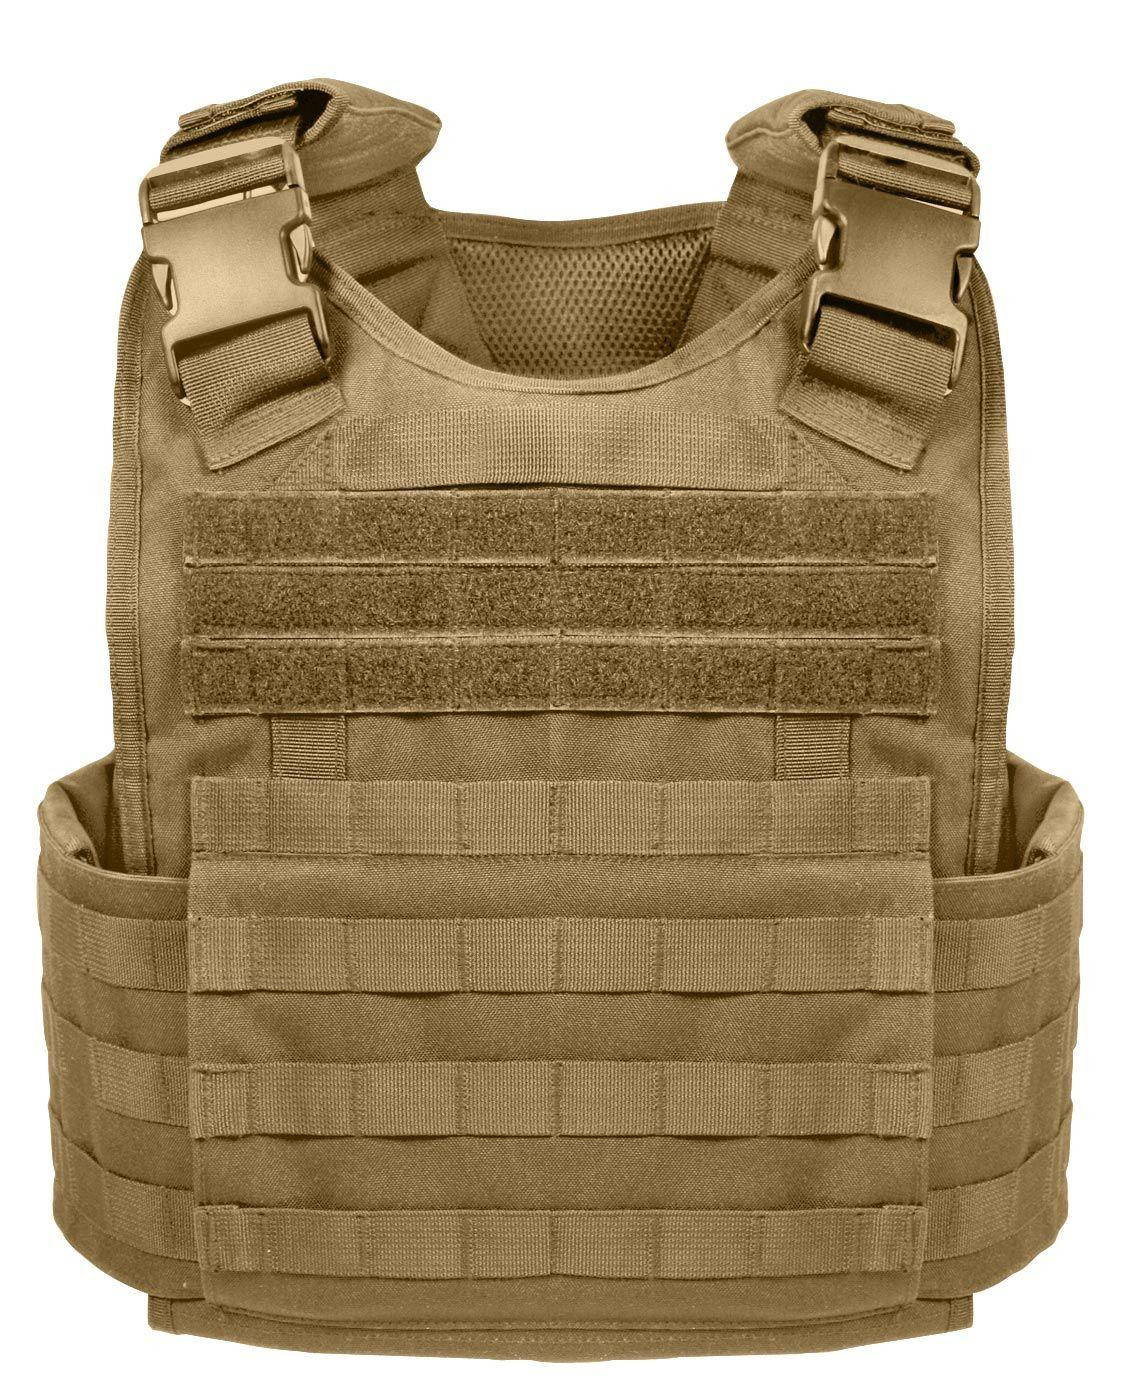 6: Rothco MOLLE Vest (Coyote Brun, One Size)